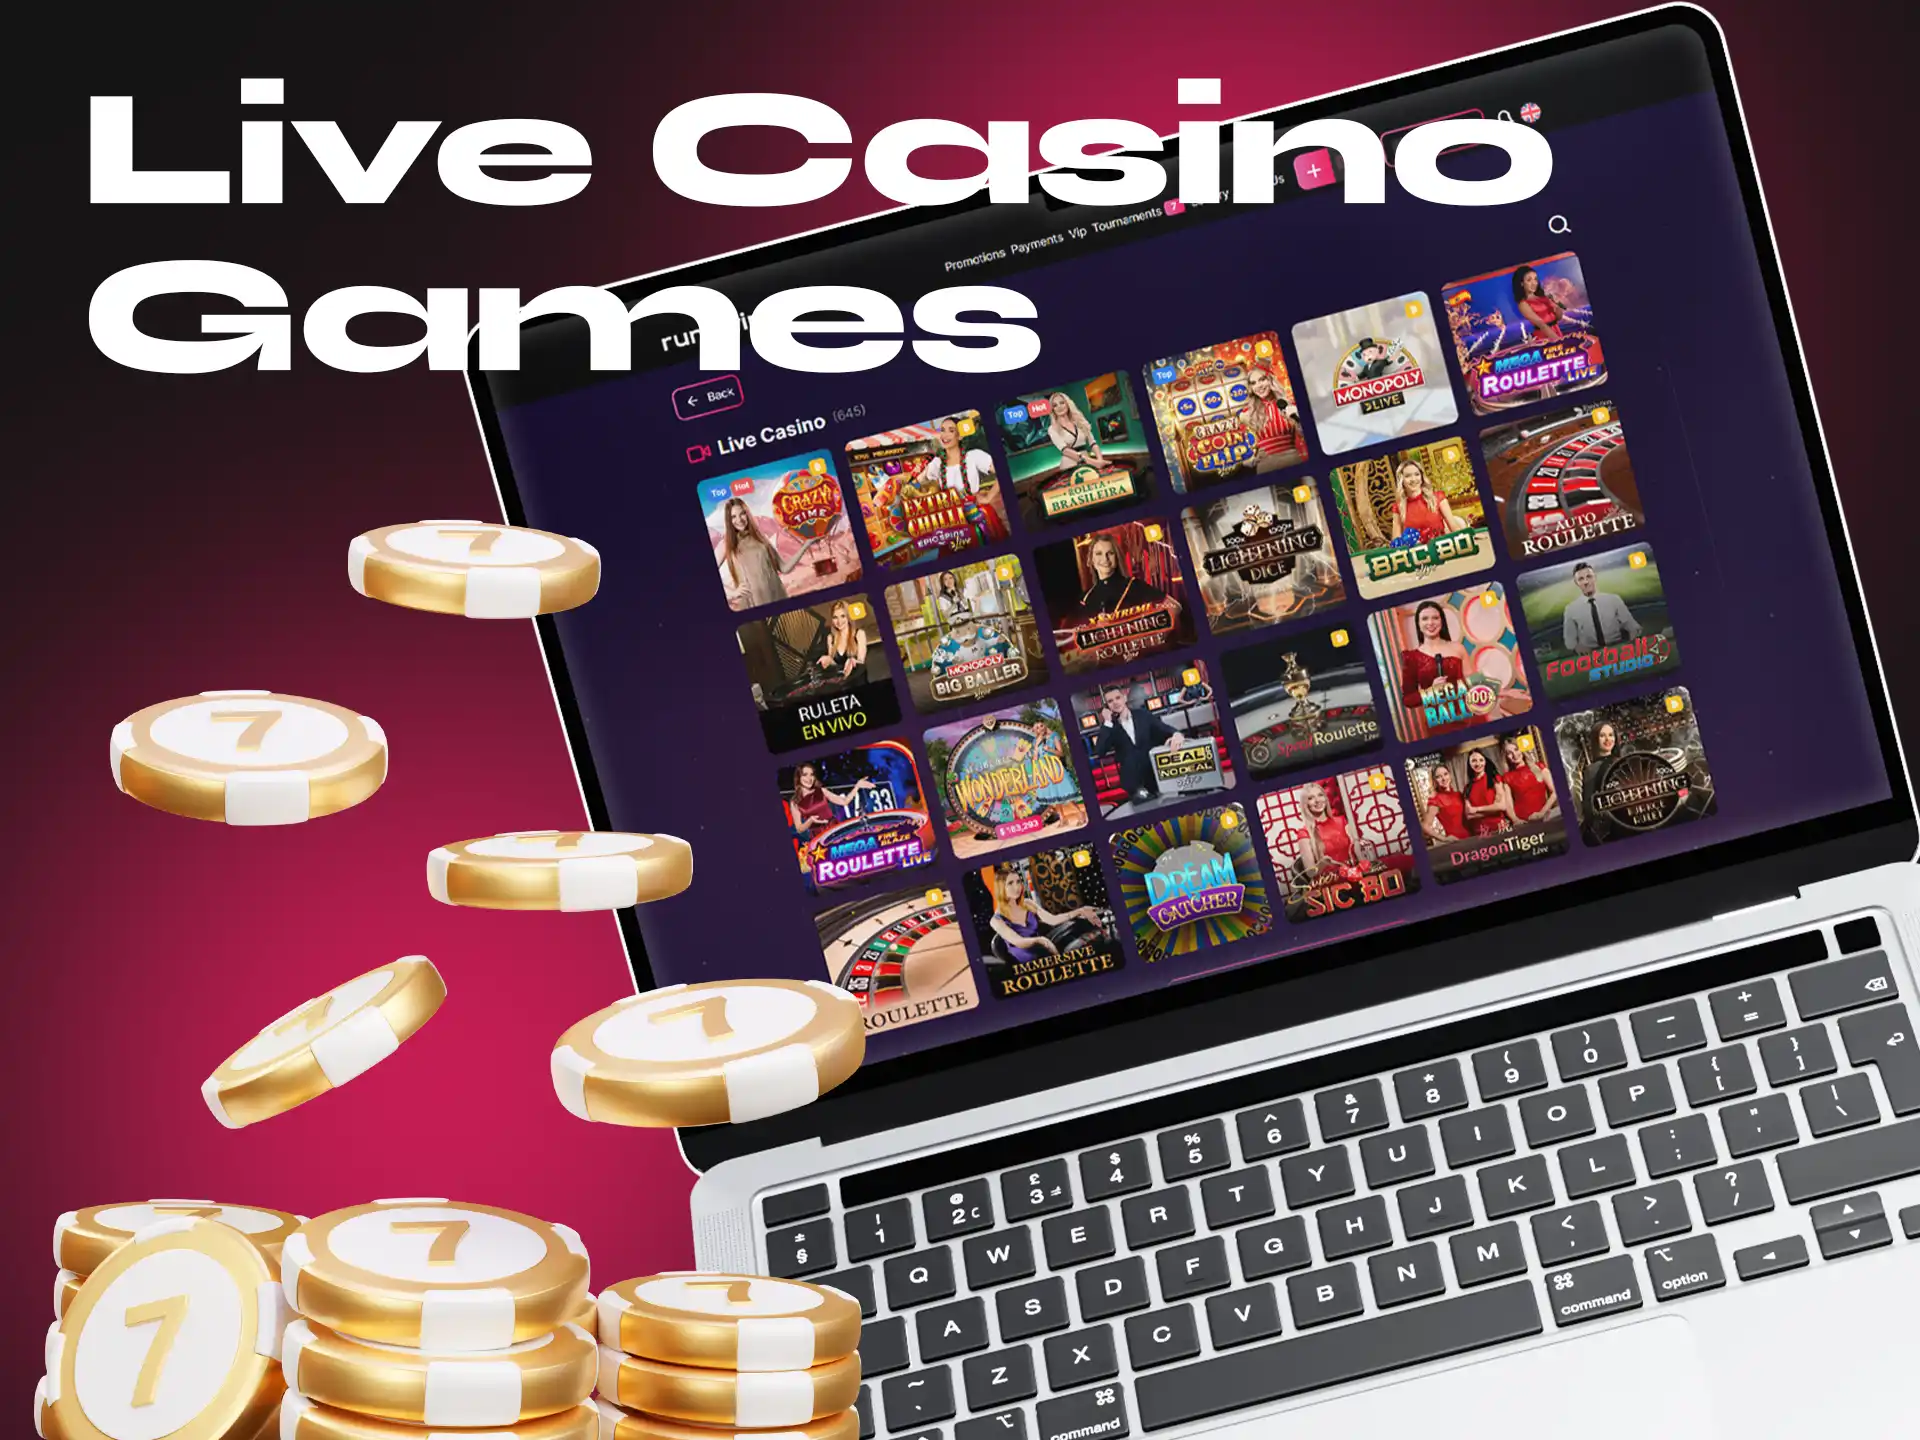 Run4Win's live casino section offers a wide selection of classic table games.